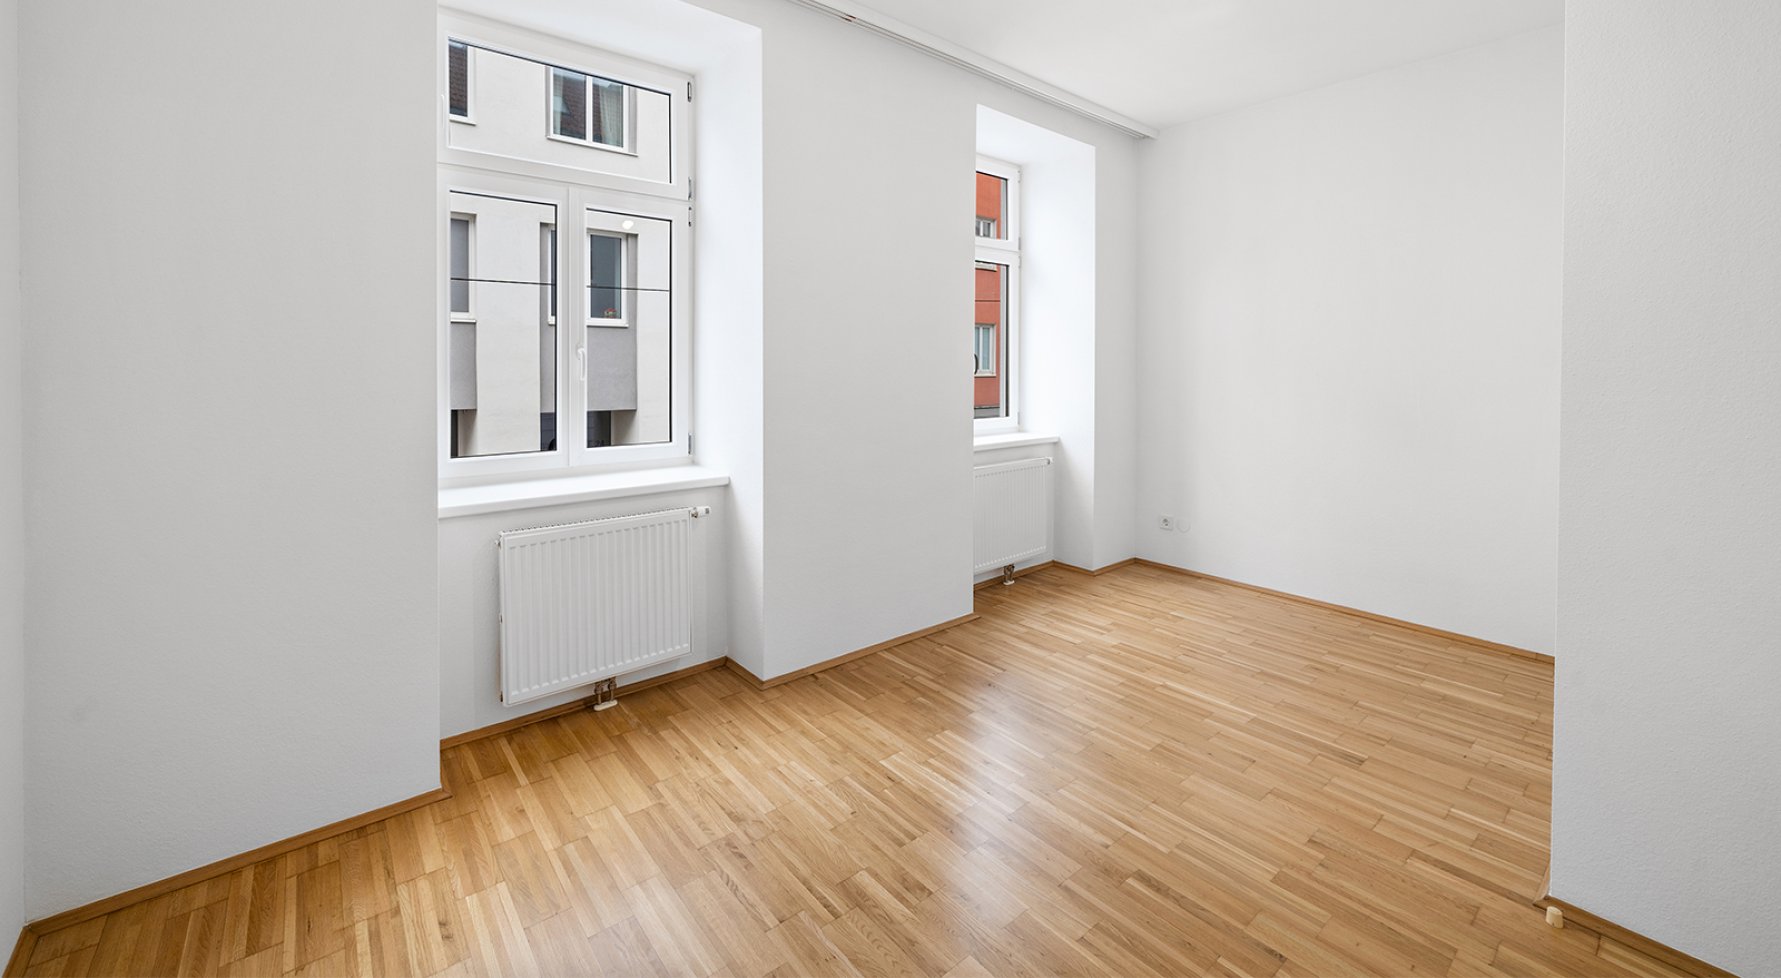 Property in 1170 Wien, 17. Bezirk: Charming 2-room flat on the 1st floor of an elevator - picture 1